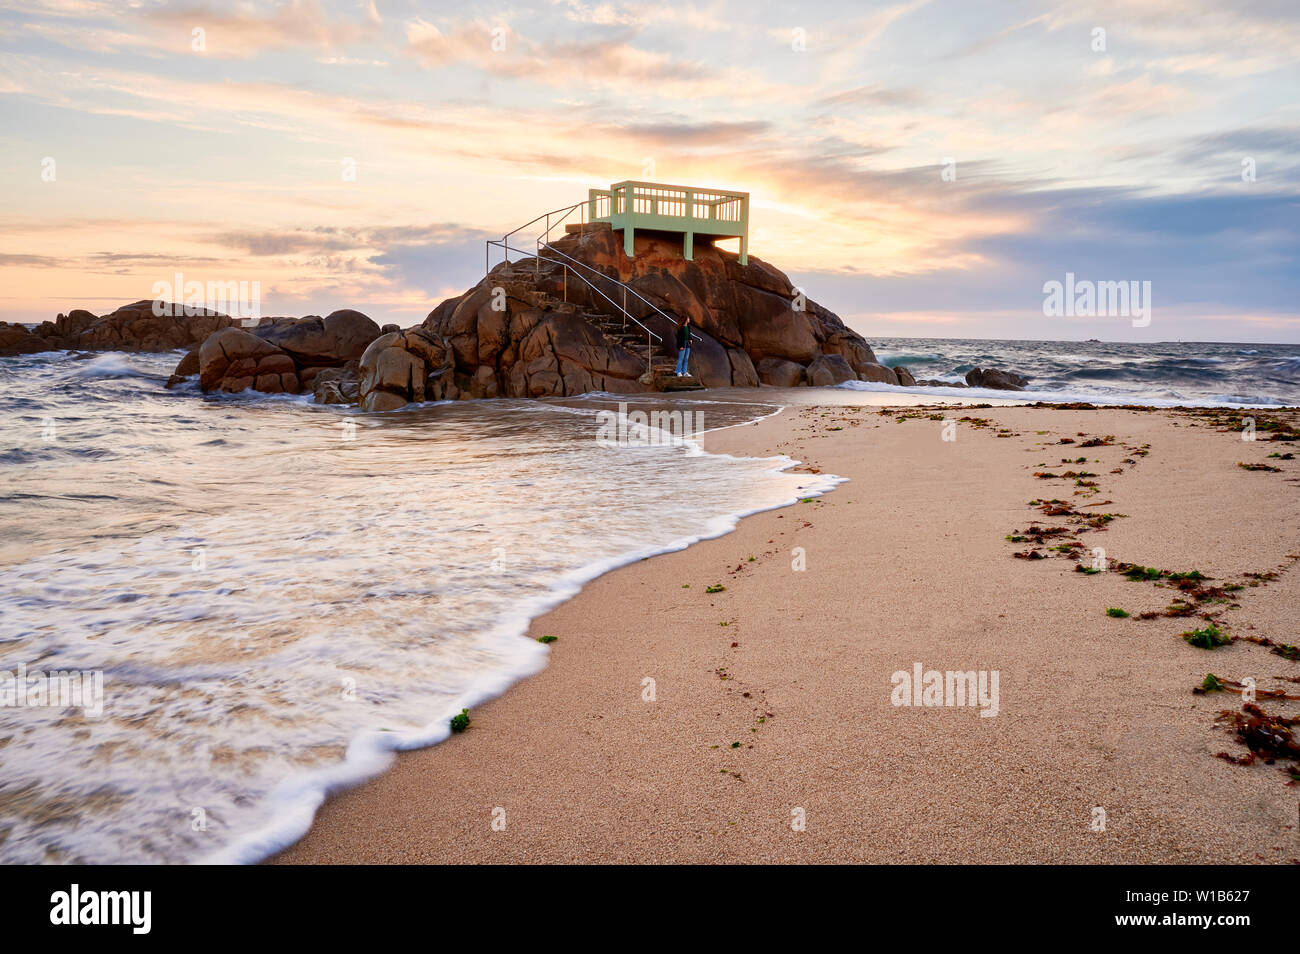 View point or gazebo over the rocks on a beach in Vila do Conde, Portugal, at sunset. Stock Photo